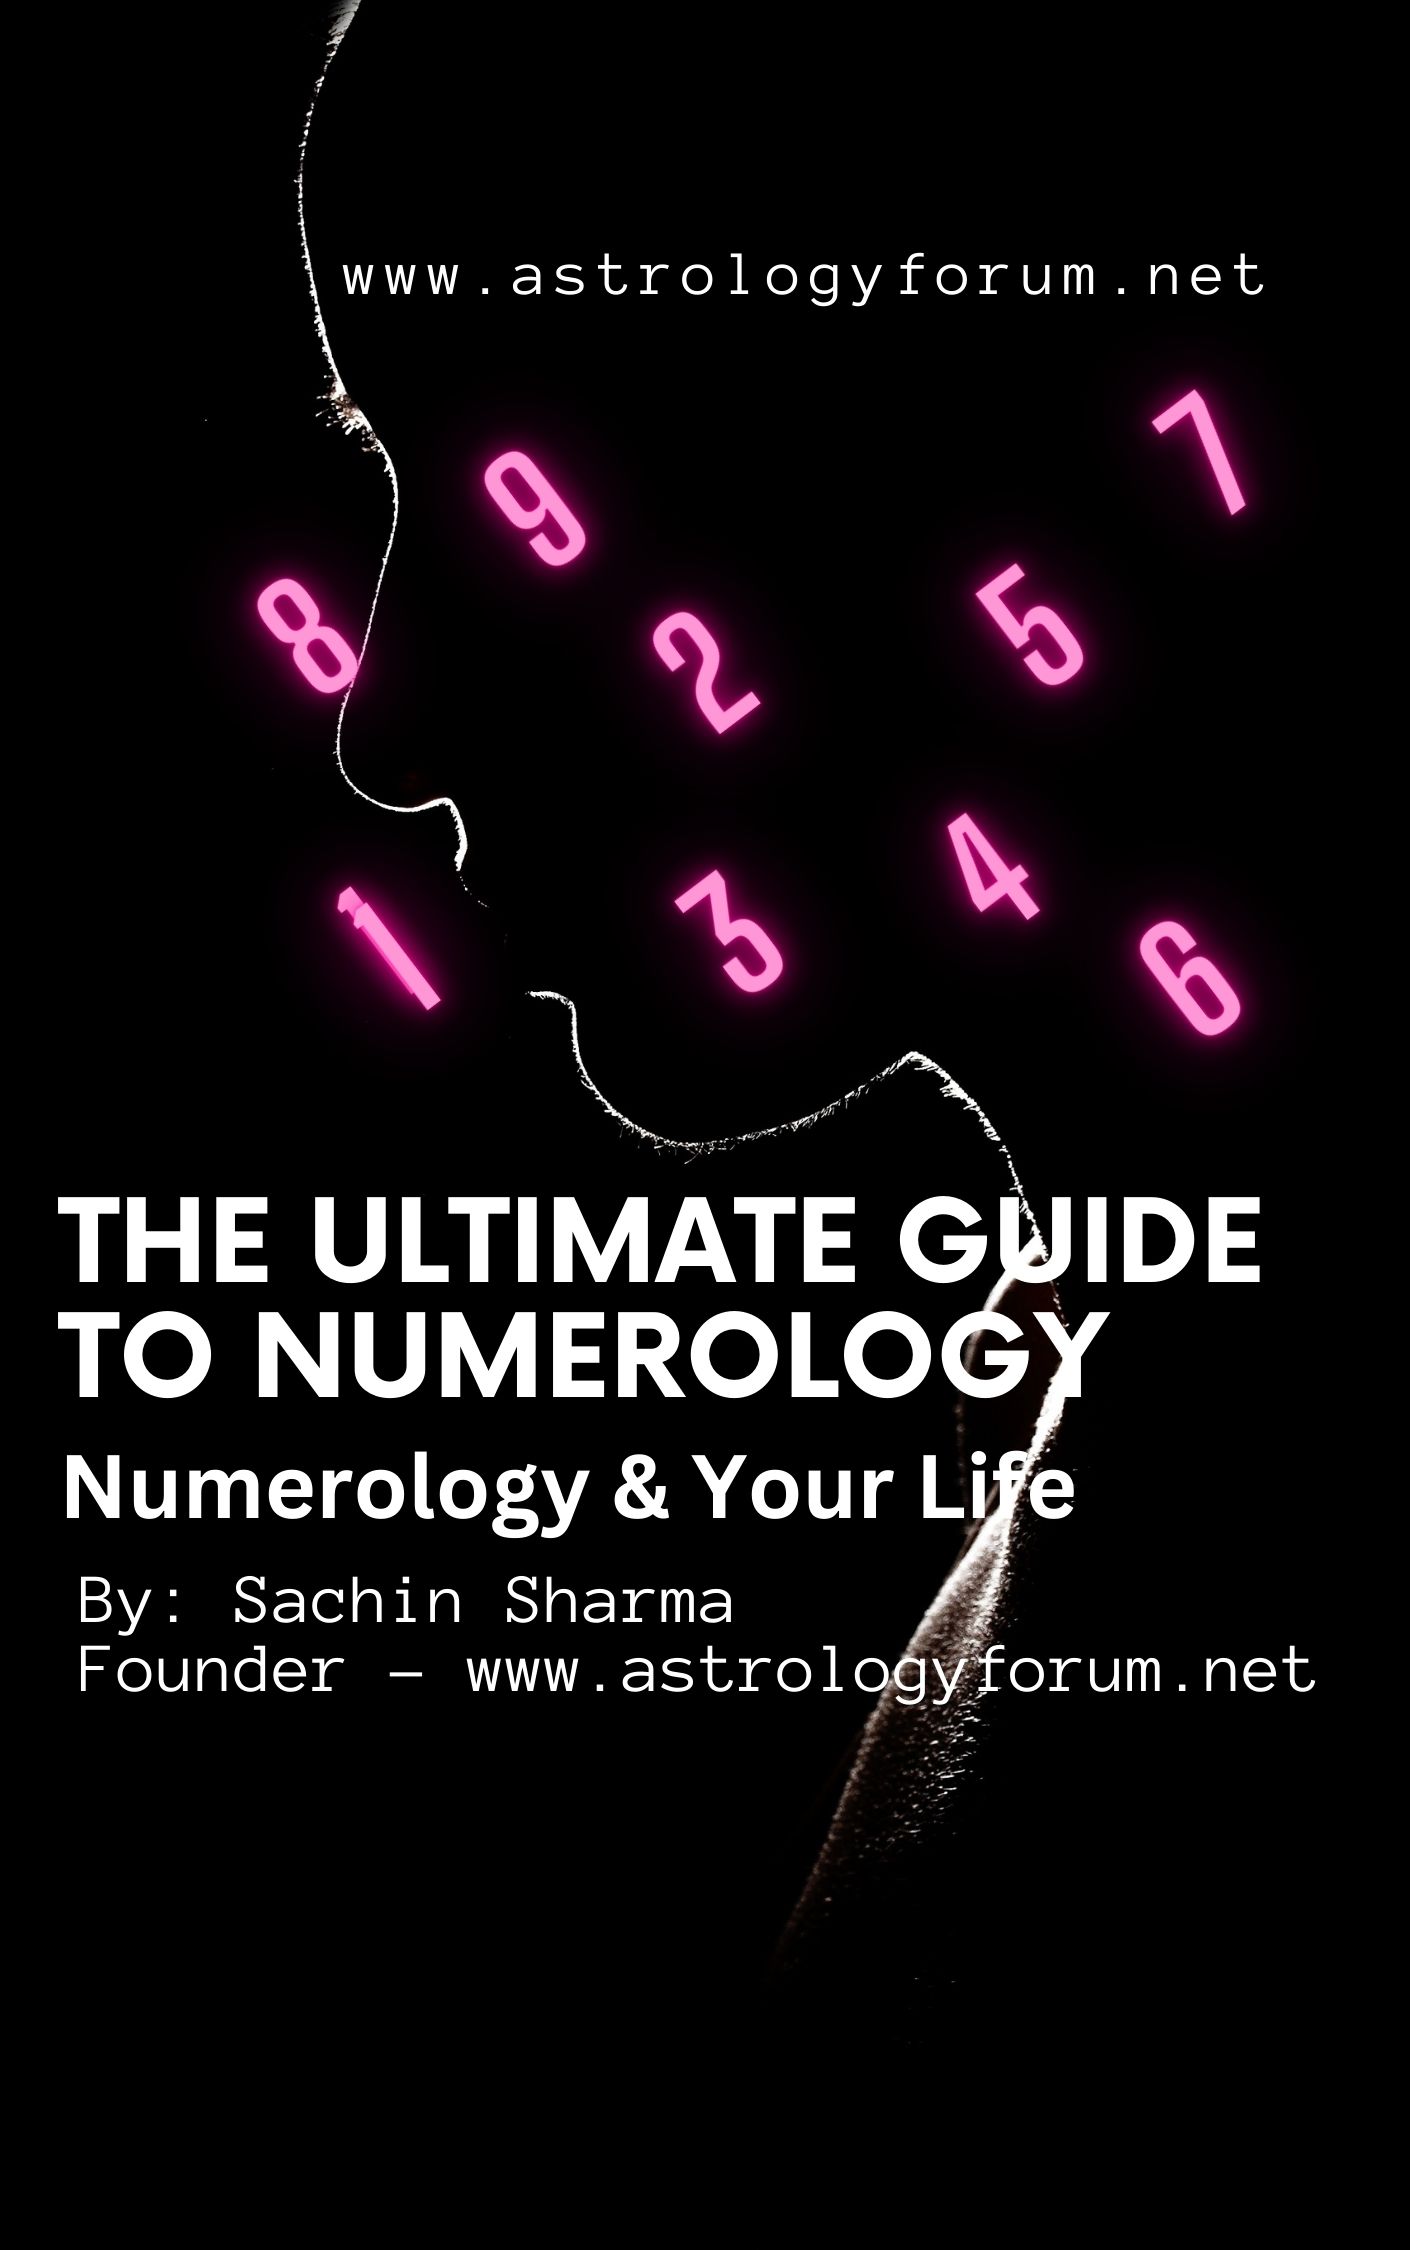 book of numerology pdf